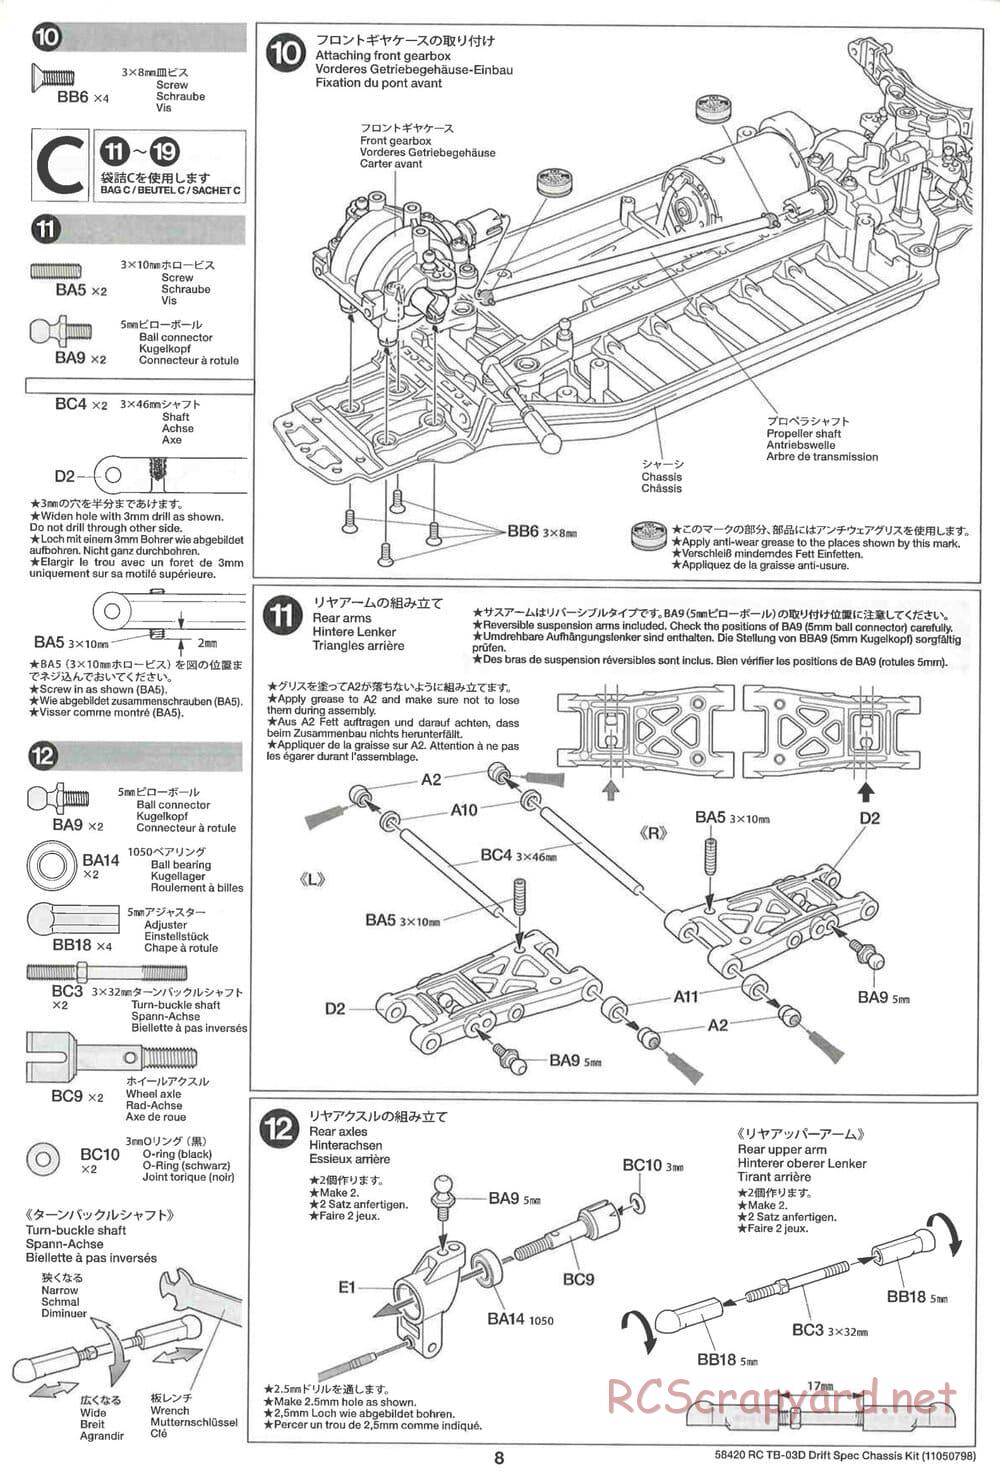 Tamiya - TB-03D HP Drift Spec Chassis - Manual - Page 8